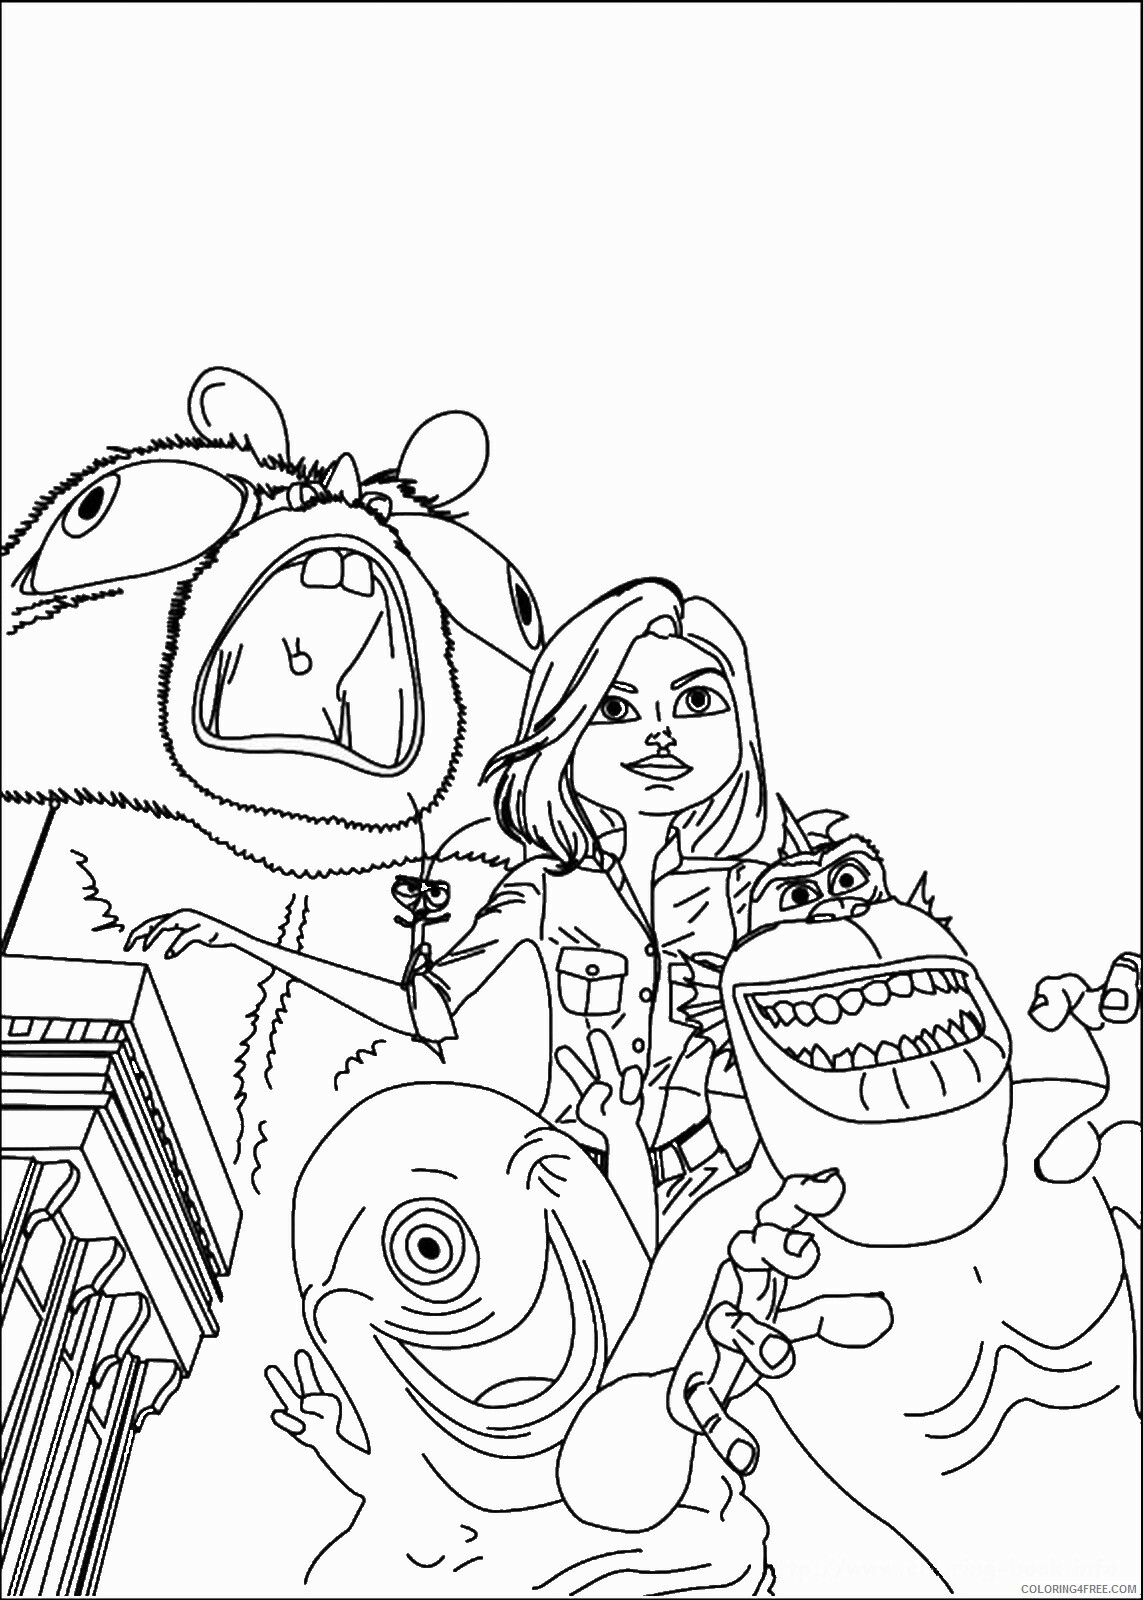 Monsters vs Aliens Coloring Pages TV Film Printable 2020 05334 Coloring4free